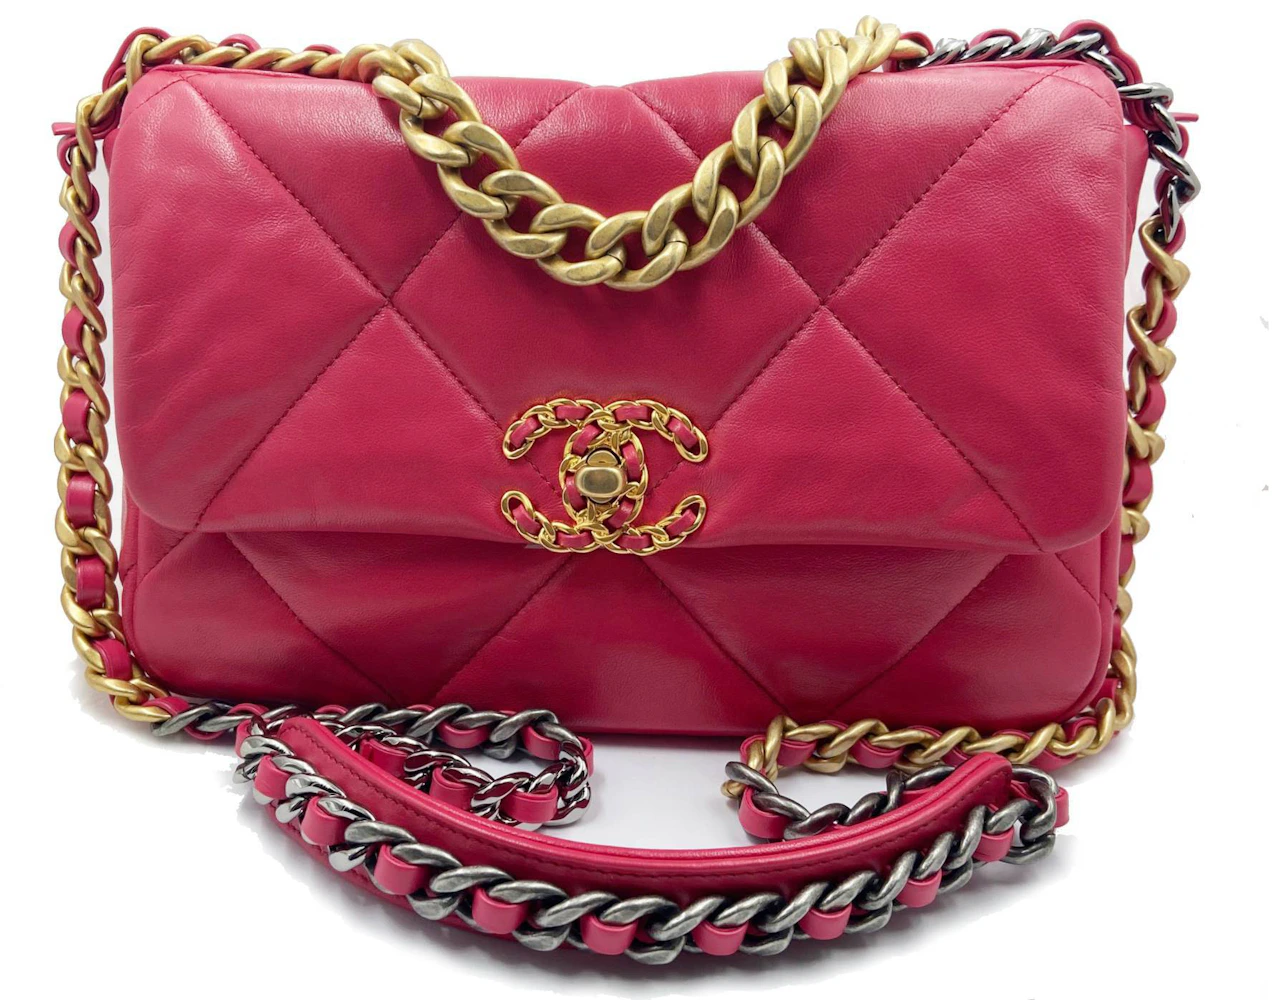 Chanel Vanity Case Bag Small 22S Calfskin Coral Pink in Calfskin